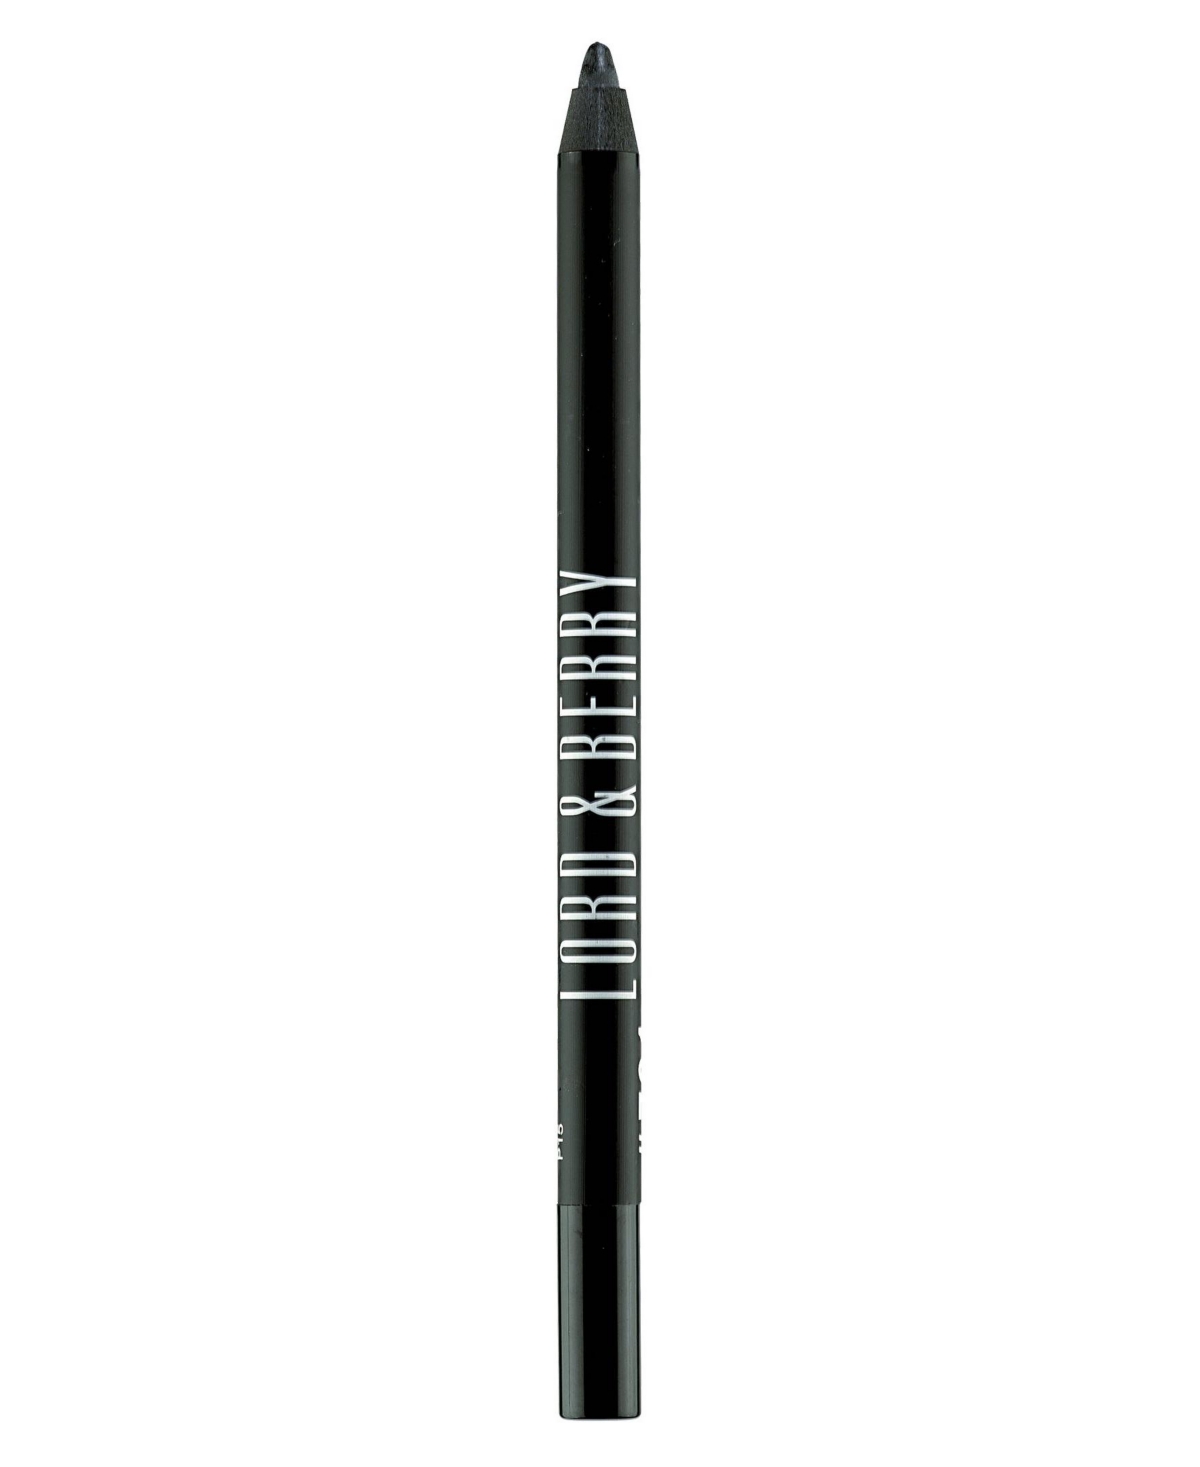 Lord & Berry Smudgeproof Eye Pencil, 0.04 oz